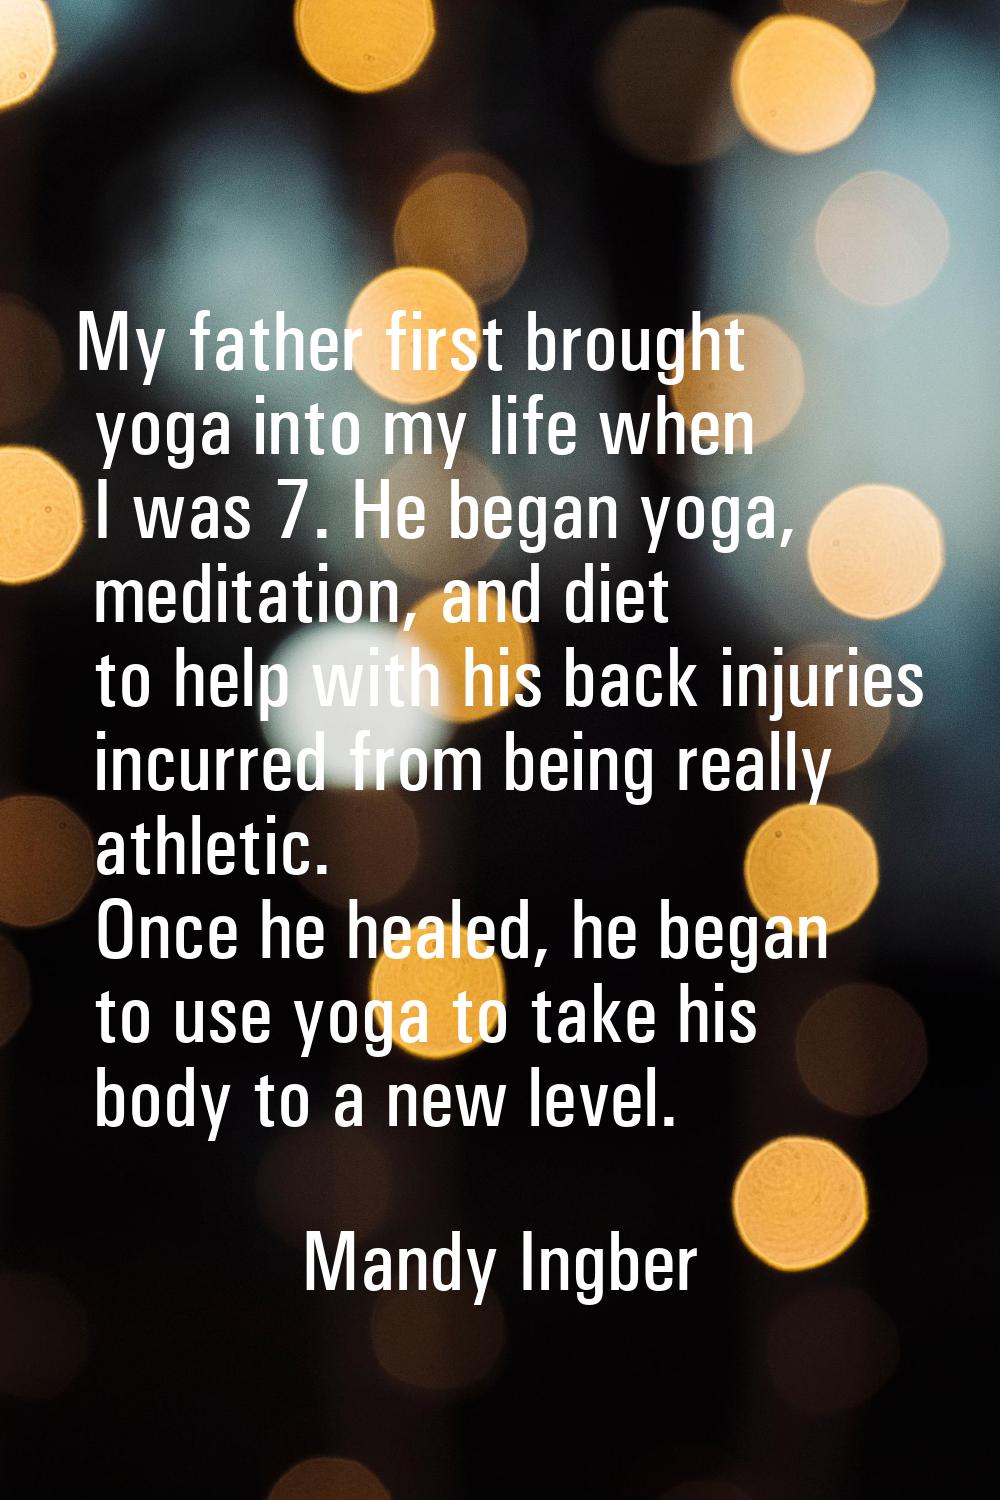 My father first brought yoga into my life when I was 7. He began yoga, meditation, and diet to help